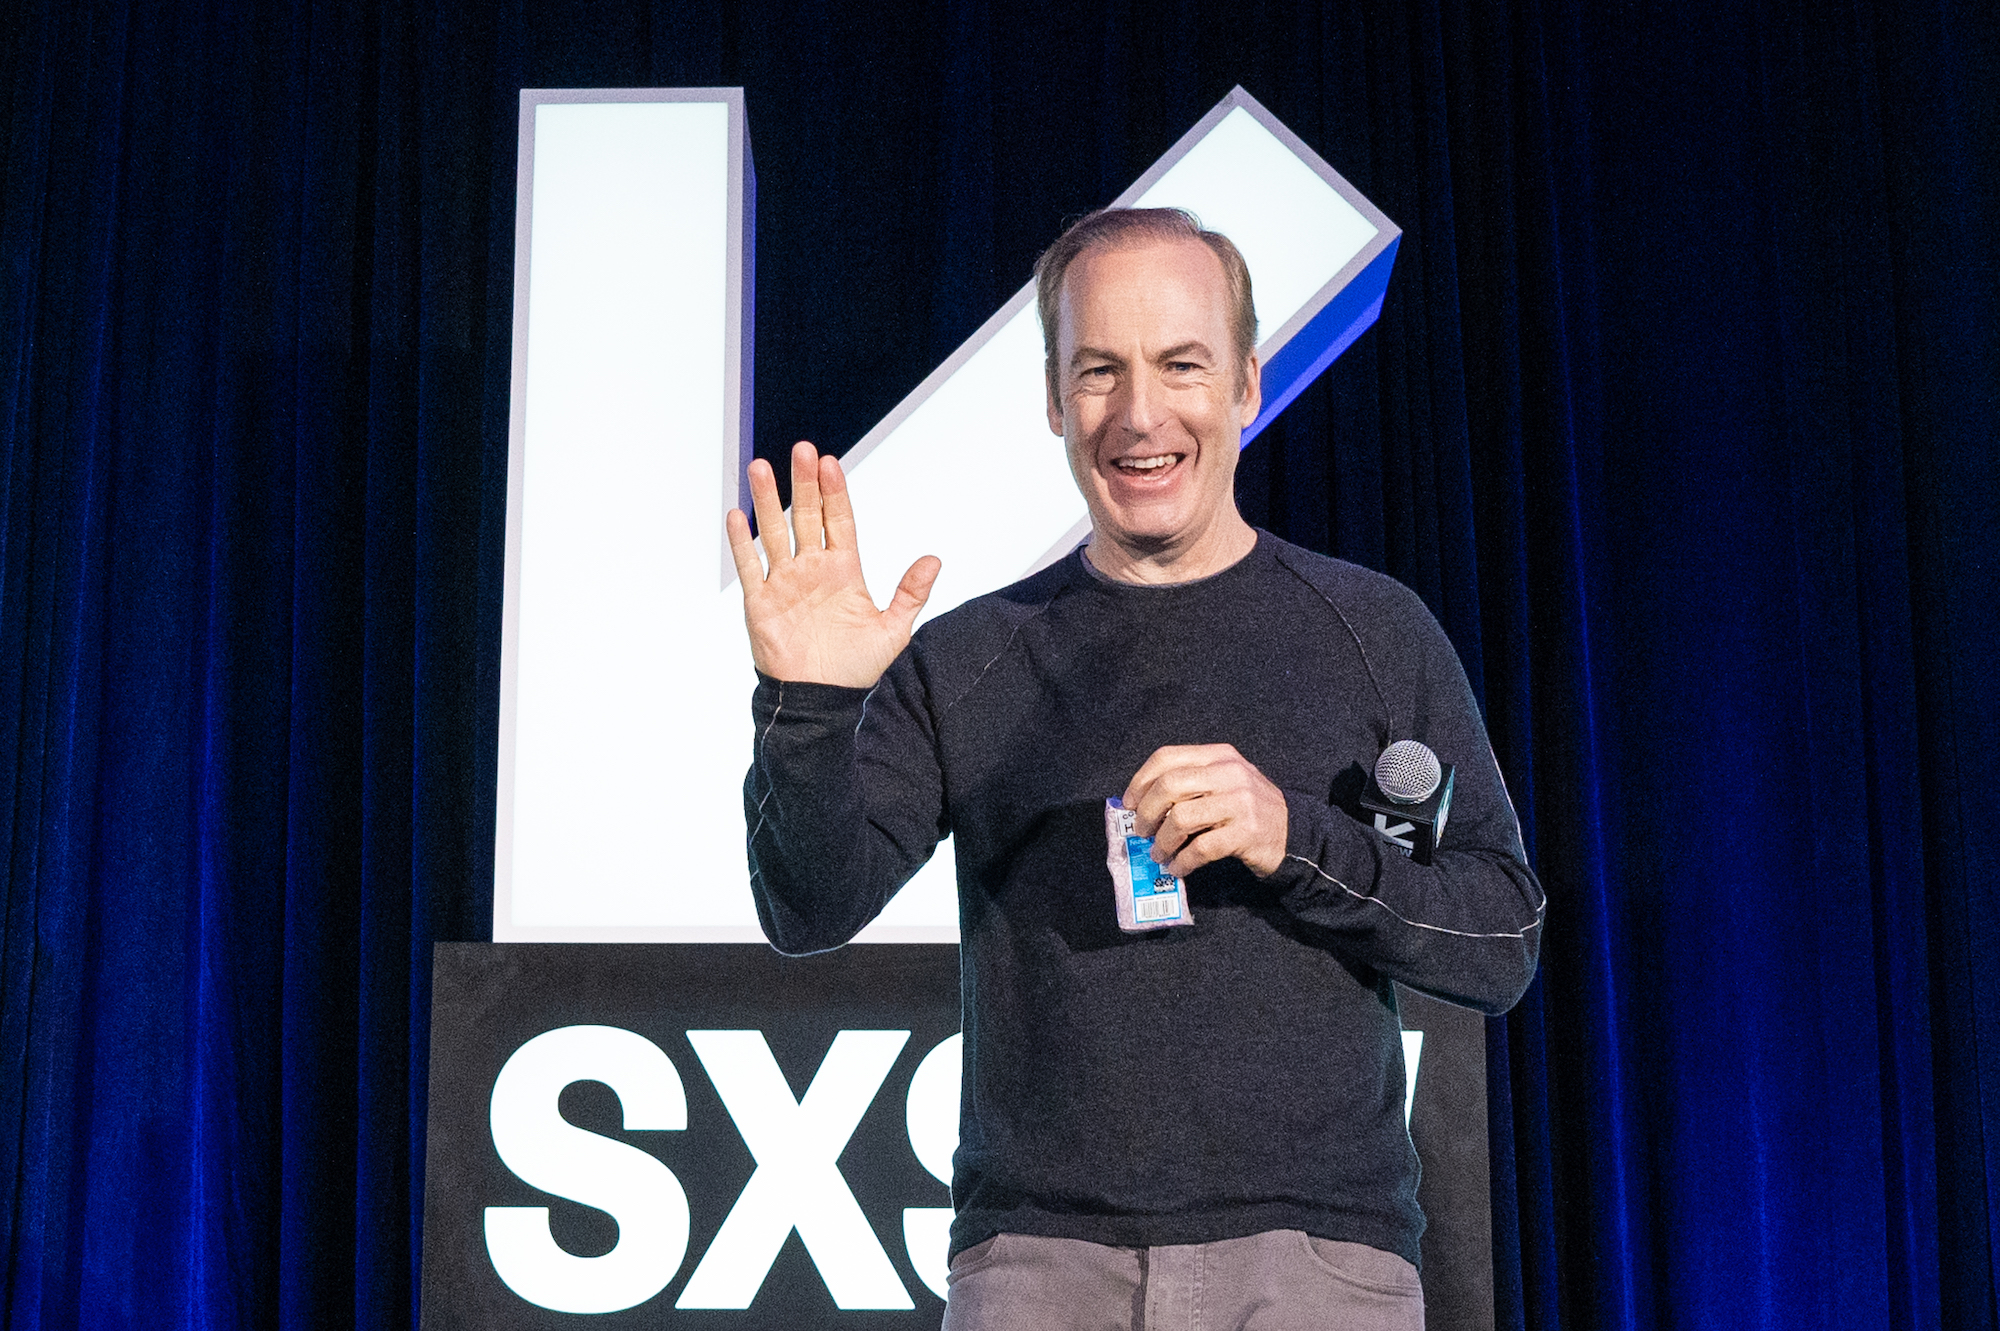 Bob Odenkirk waves on stage at SXSW